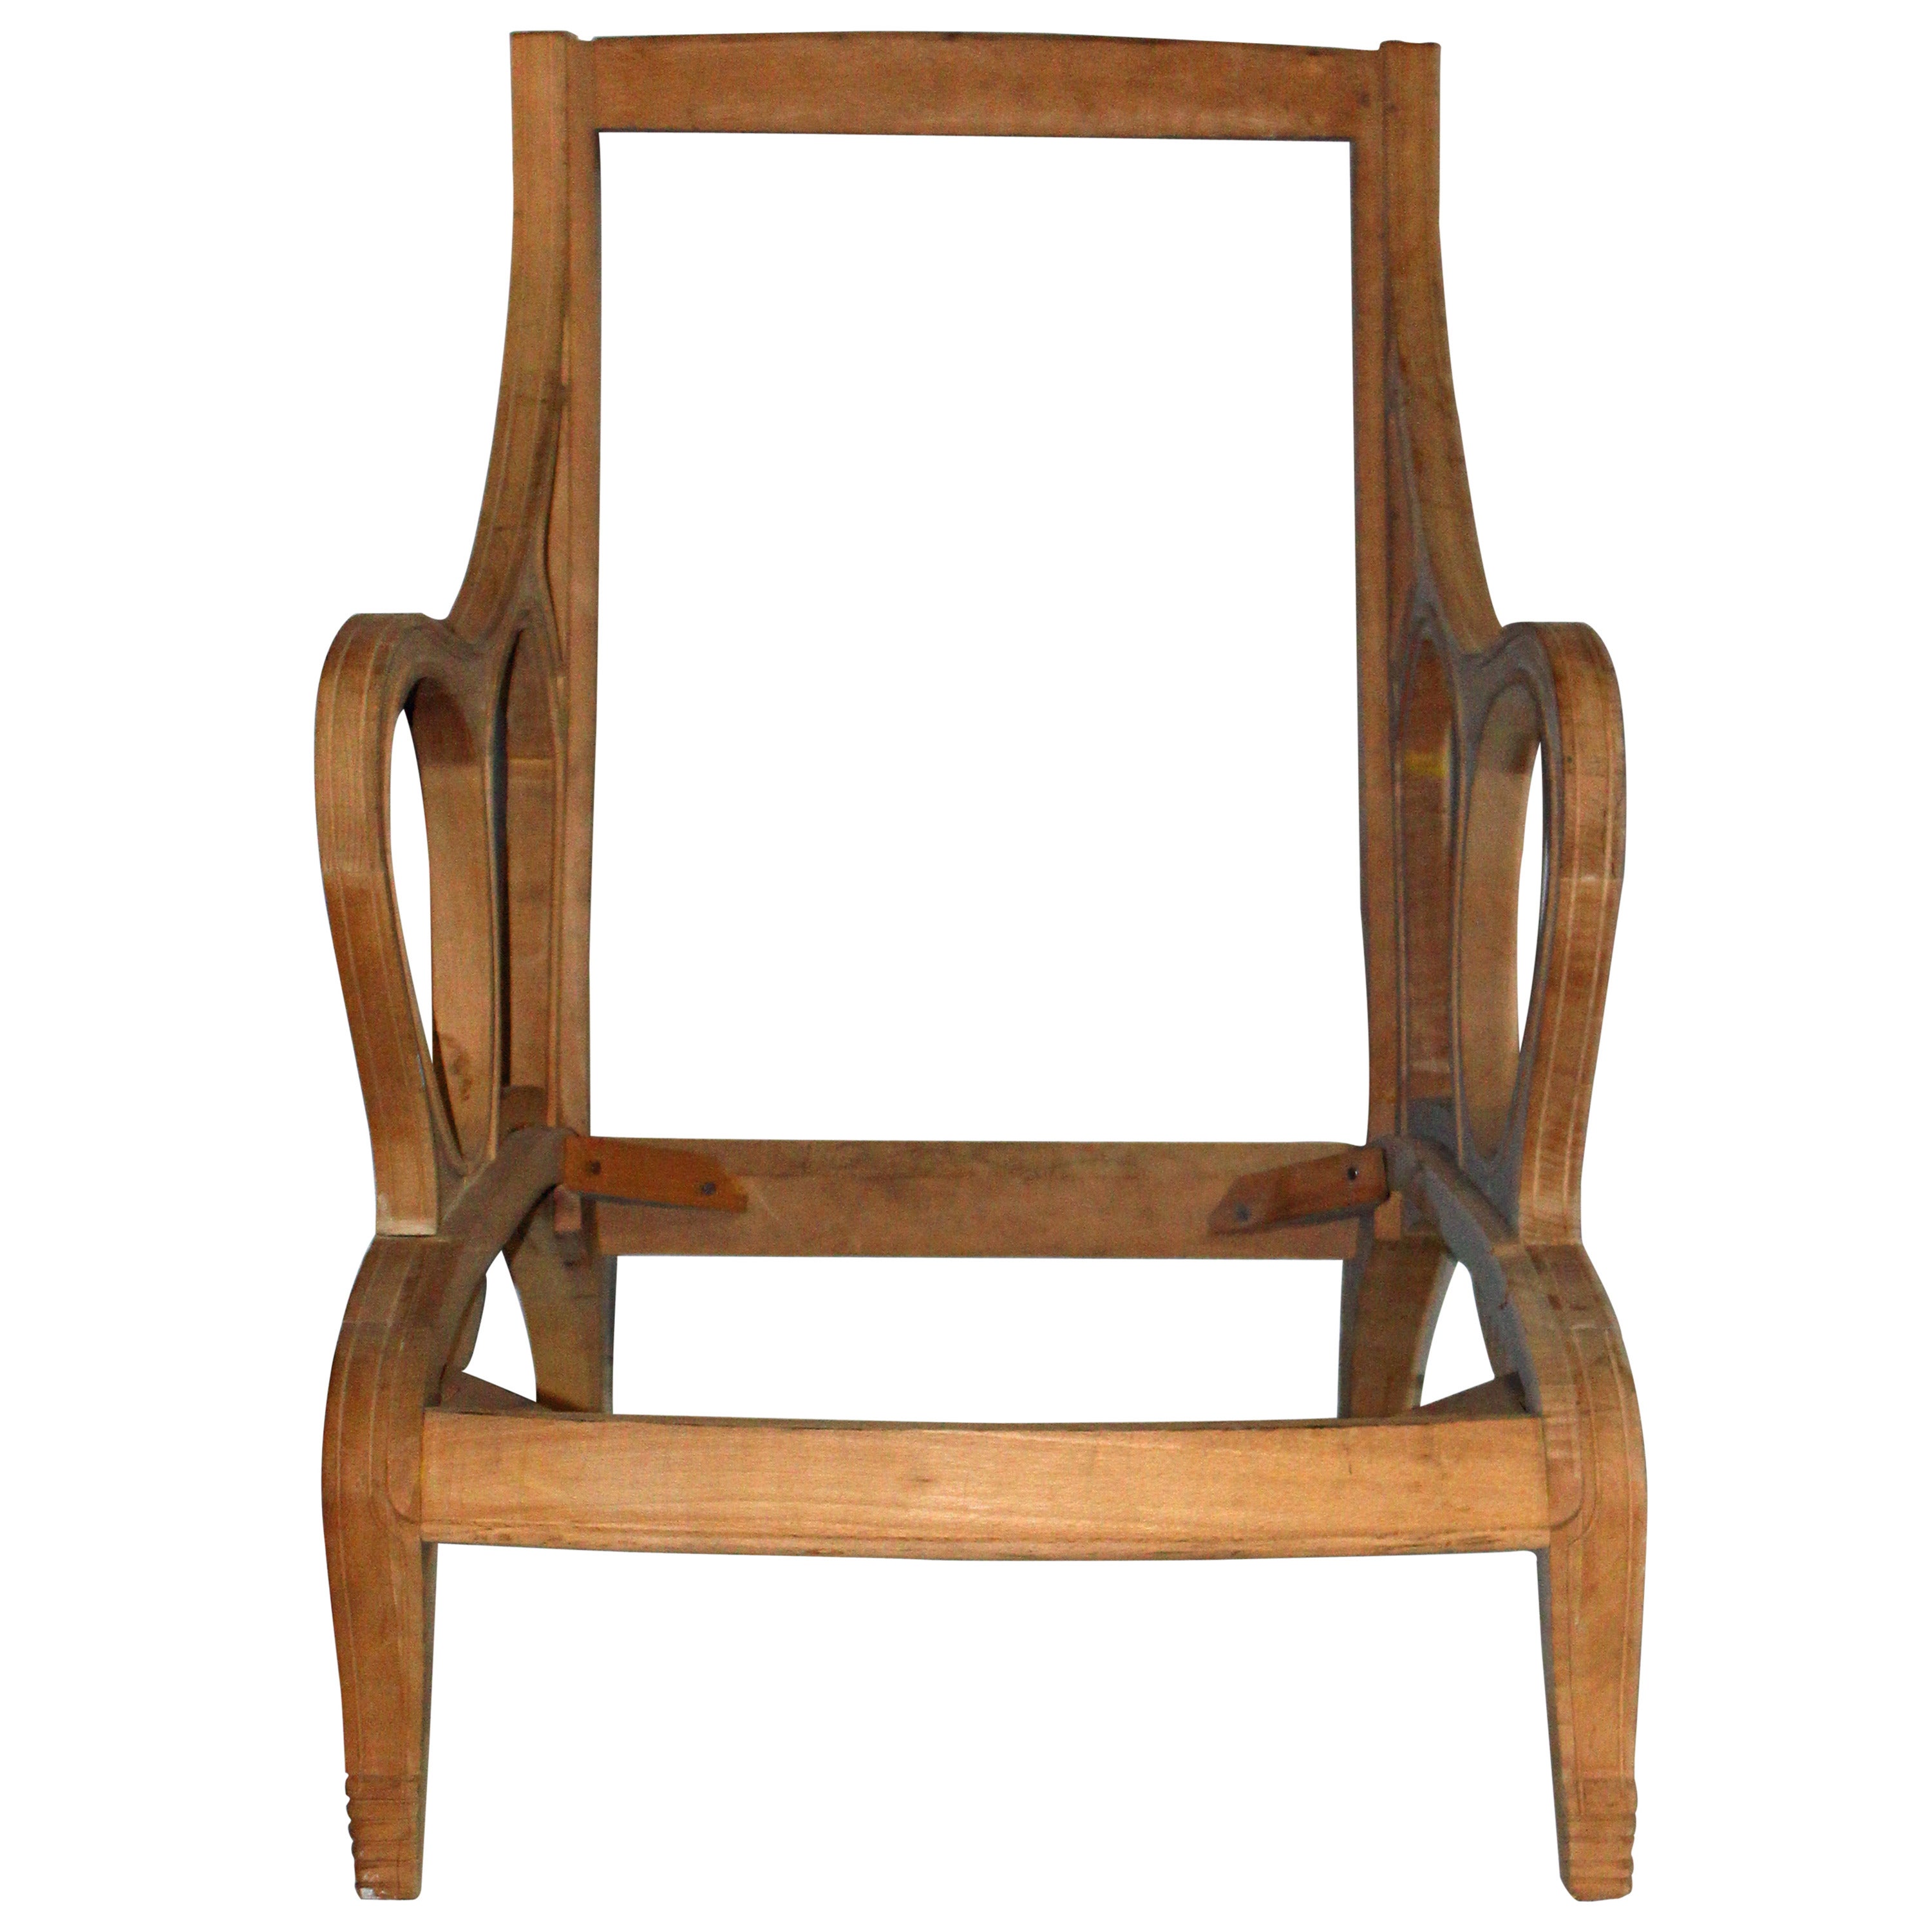 Chic Vintage Chair Frames from the David Barrett Collection